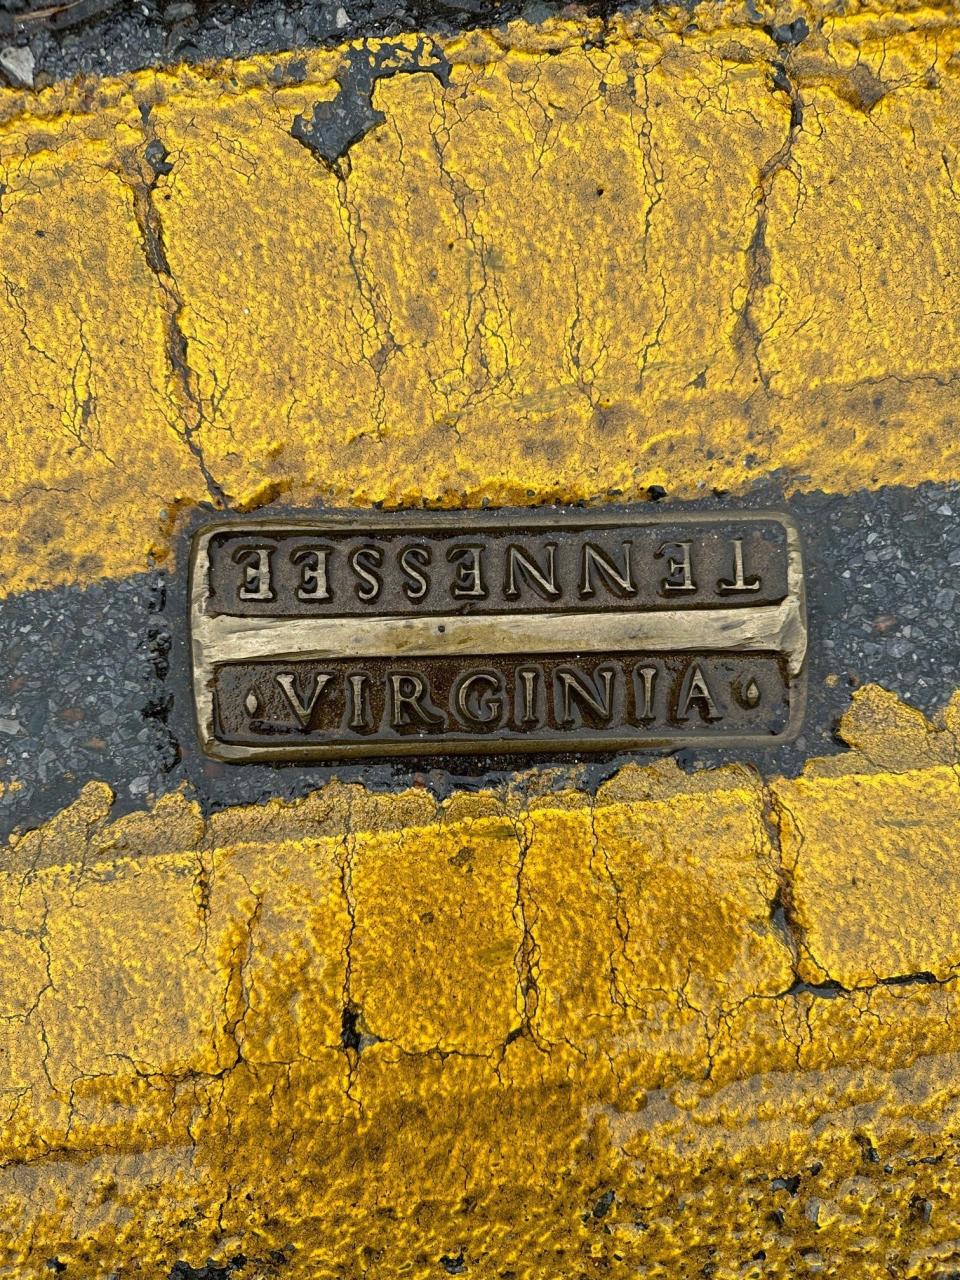 This marker in the middle of Bristol's State Street indicates which side of the road is in Virginia and which is in Tennessee. The city straddles the state line.